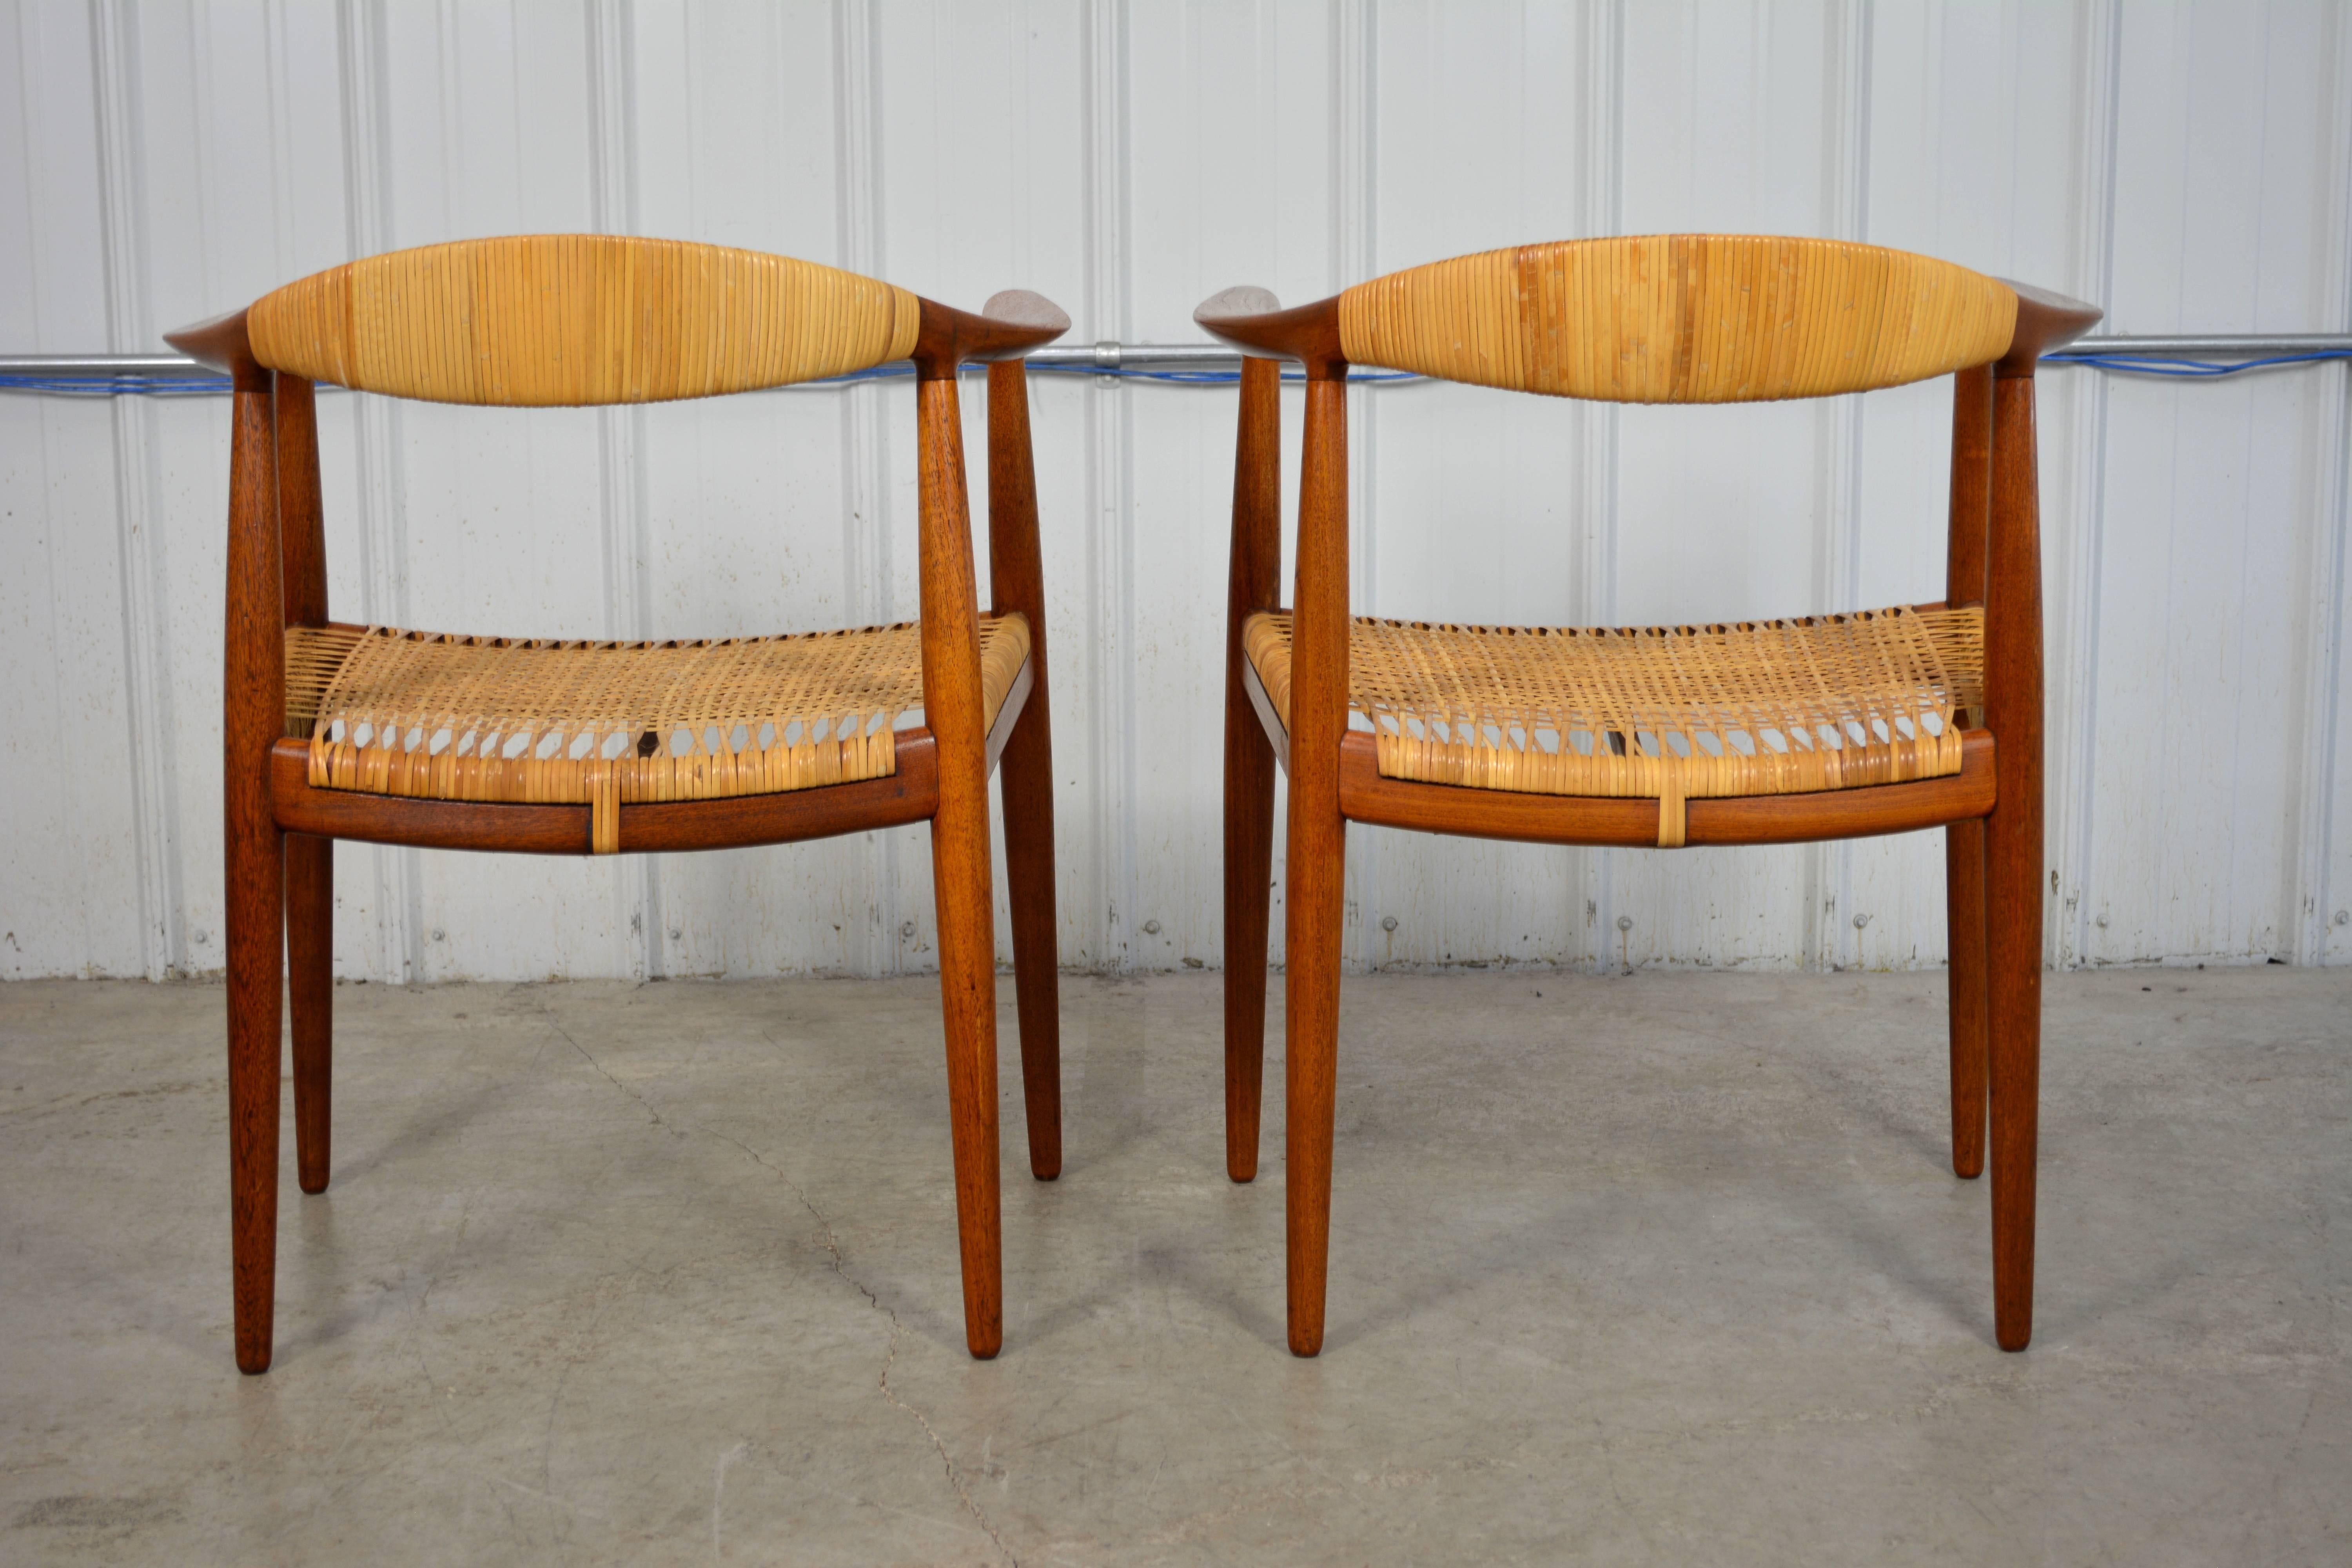 An early pair of "Round" chairs by Hans Wegner for Johannes Hansen in original condition. Solid teak frame with beautifully aged patina. Caned seats and cane wrapped backs. Two more matching chairs available.